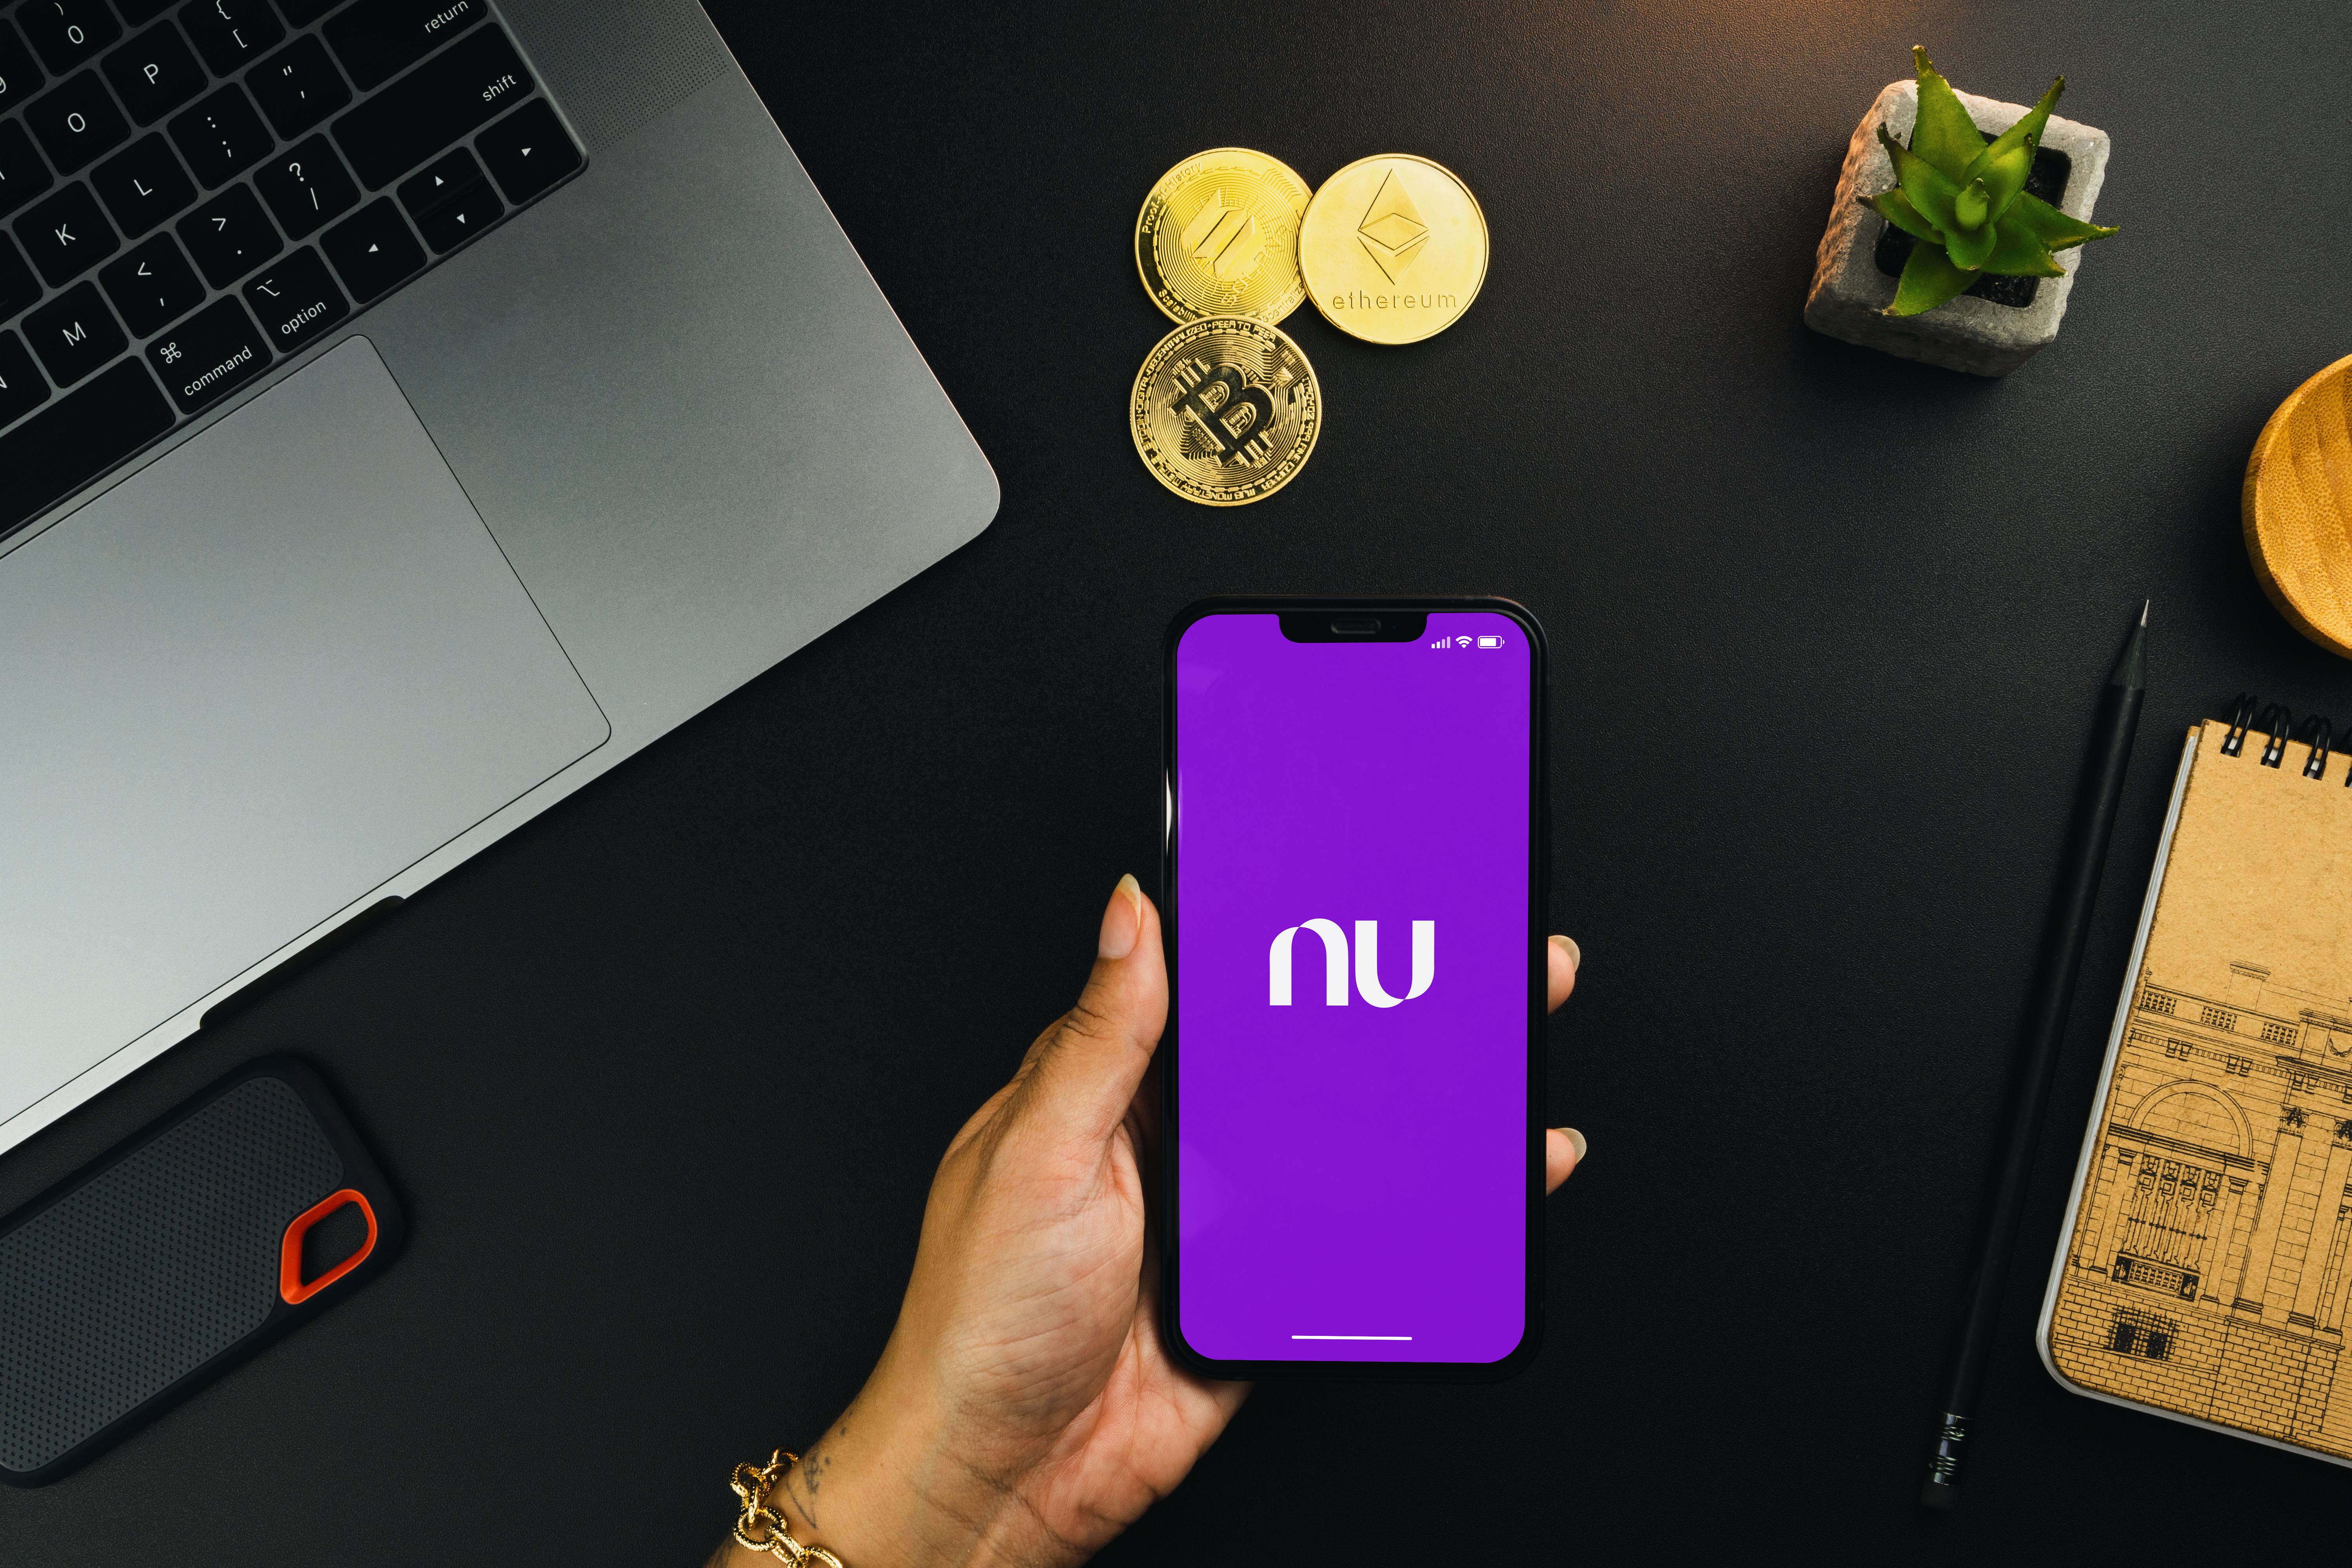 A person holds a smartphone with the Nubank bank app running on the screen. On a table behind the phone, artistic representations of cryptoassets are visible, along with a laptop computer.